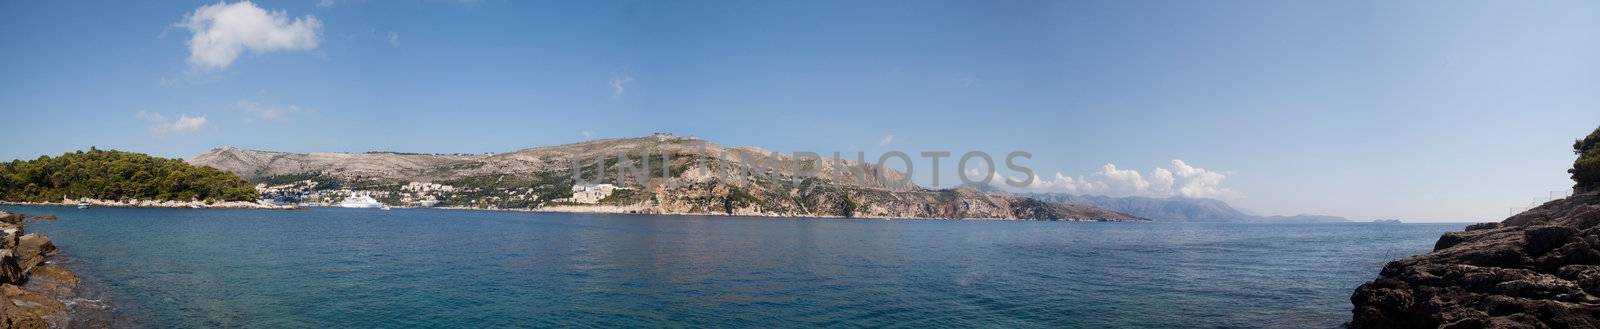 A panoramic view of the hill side in Dubrovnik, Croatia